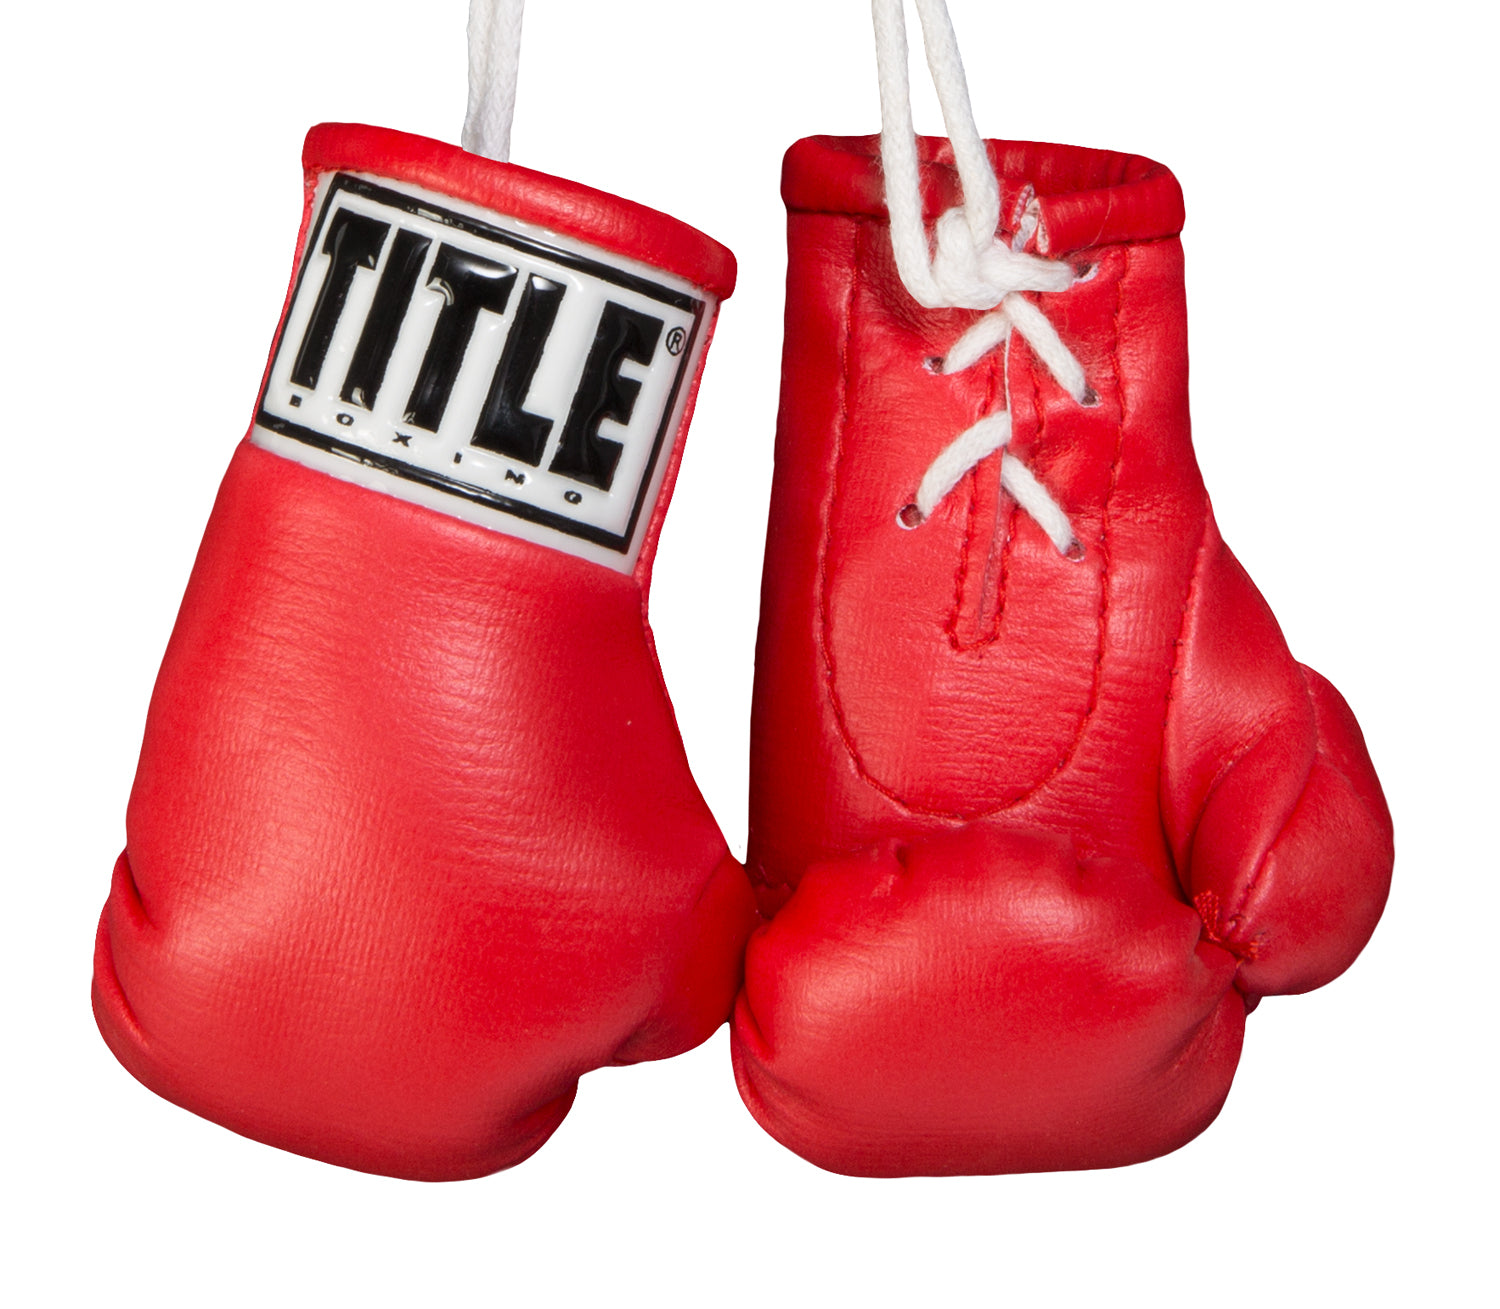 Special listing for 20 Mini boxing gloves 